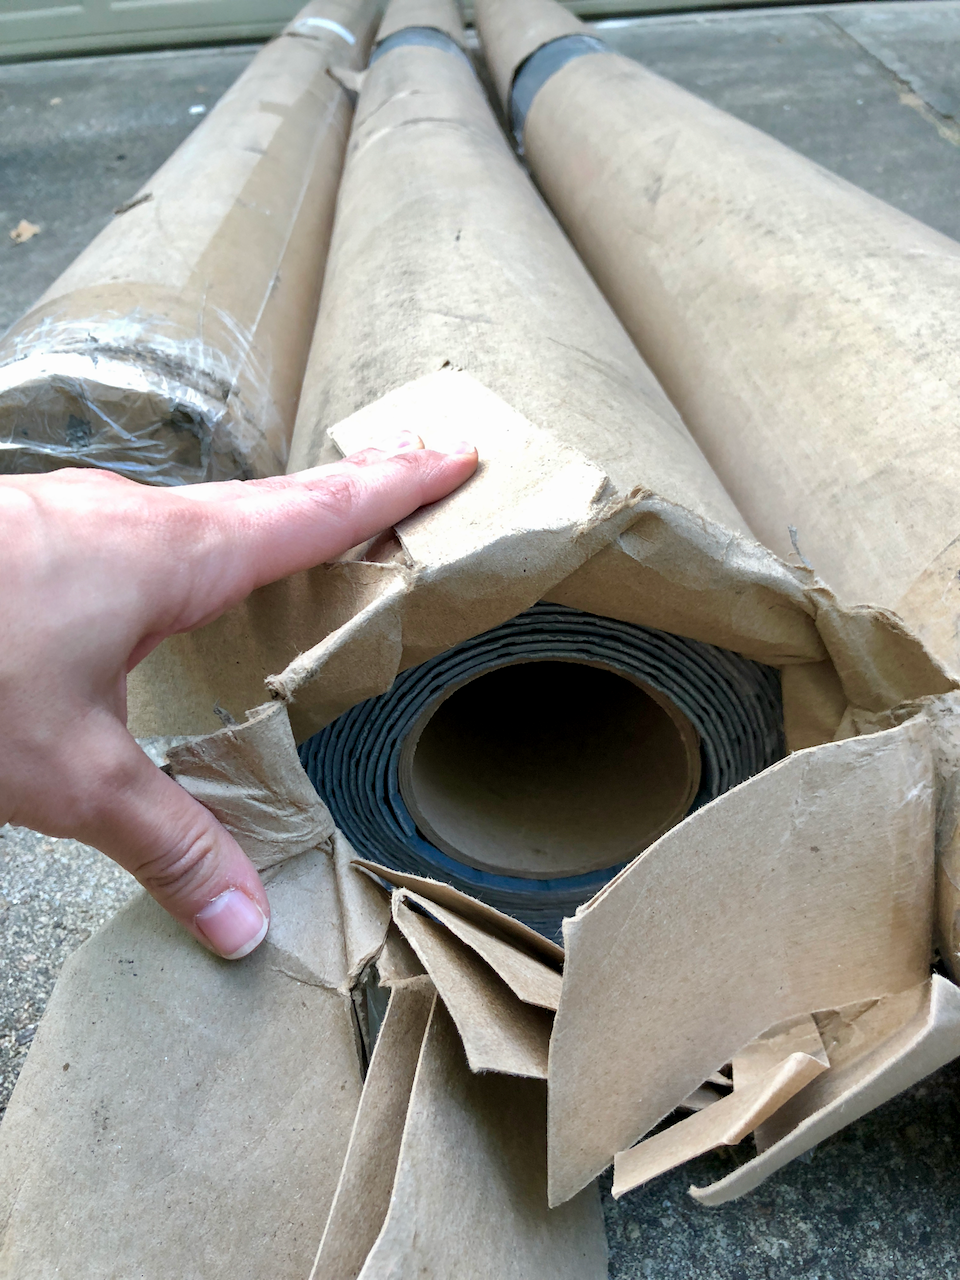 The flooring comes in rolls packaged in cardboard and plastic.